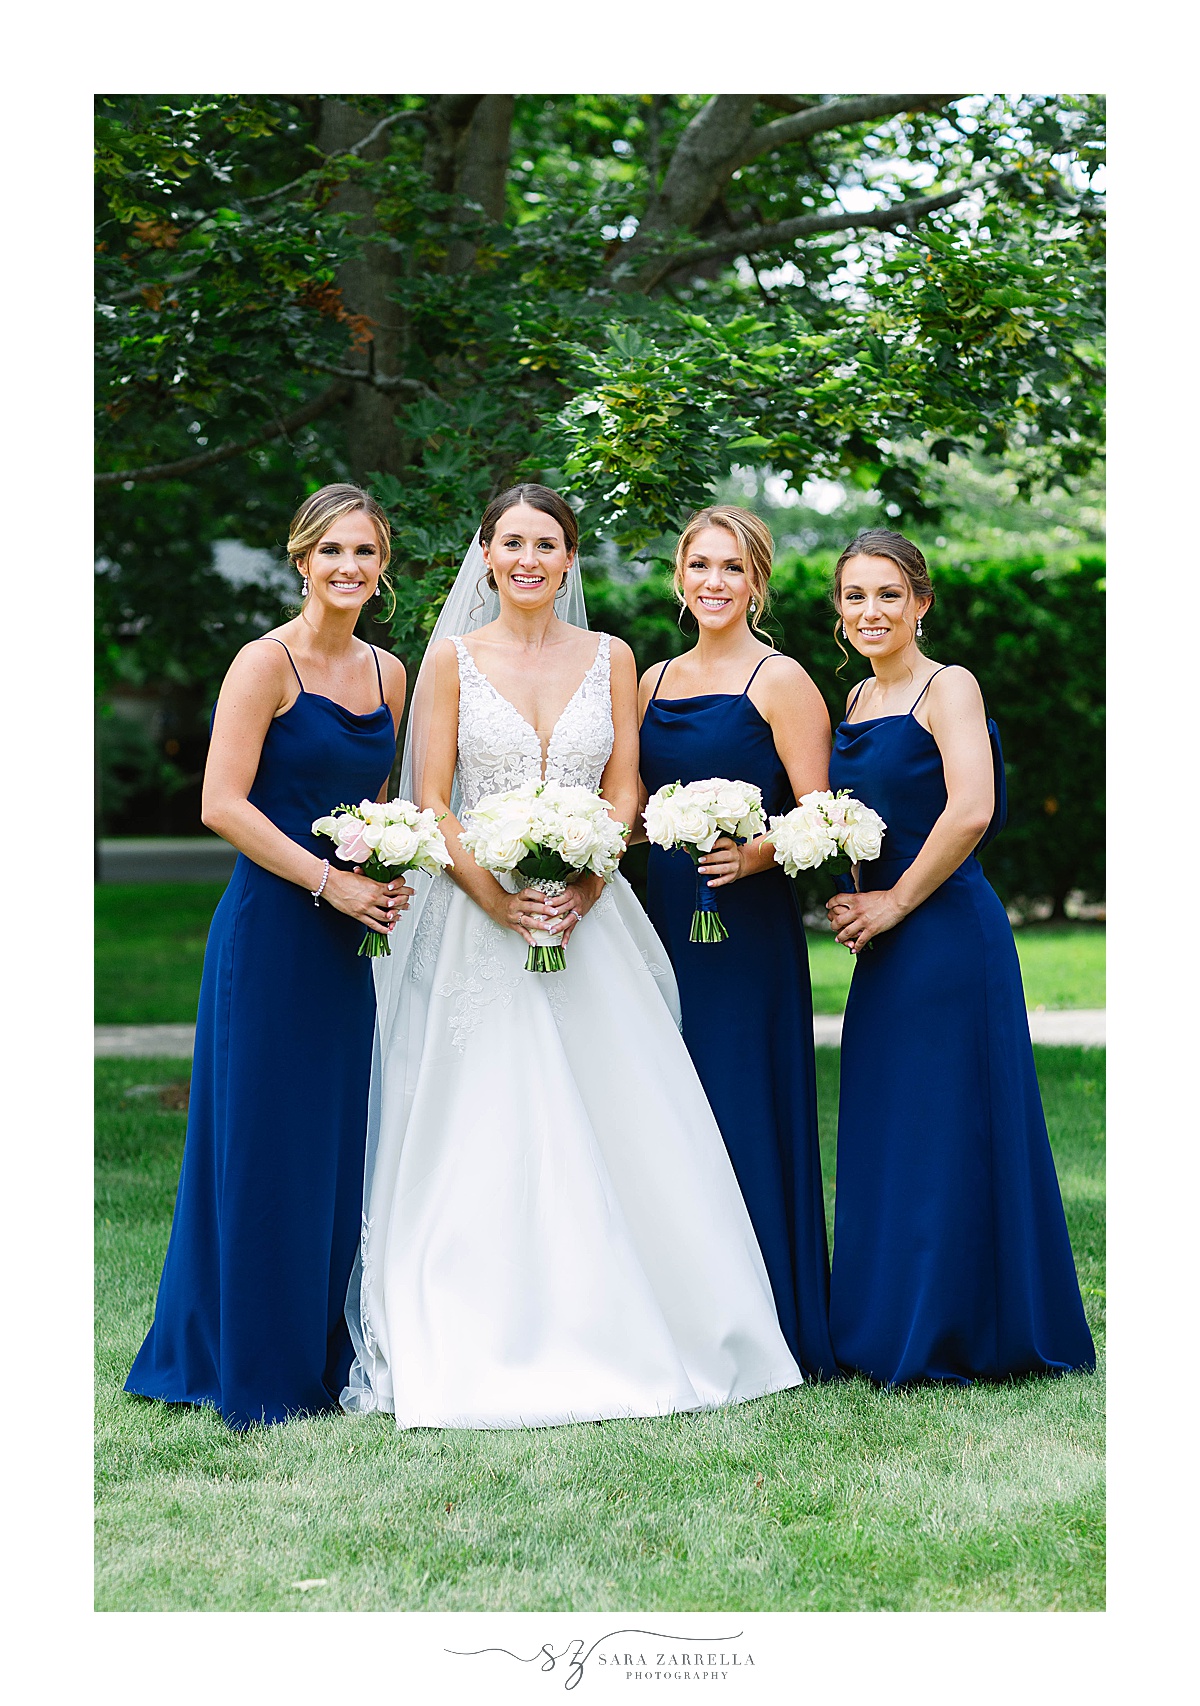 three bridesmaids in navy gowns stand with bride